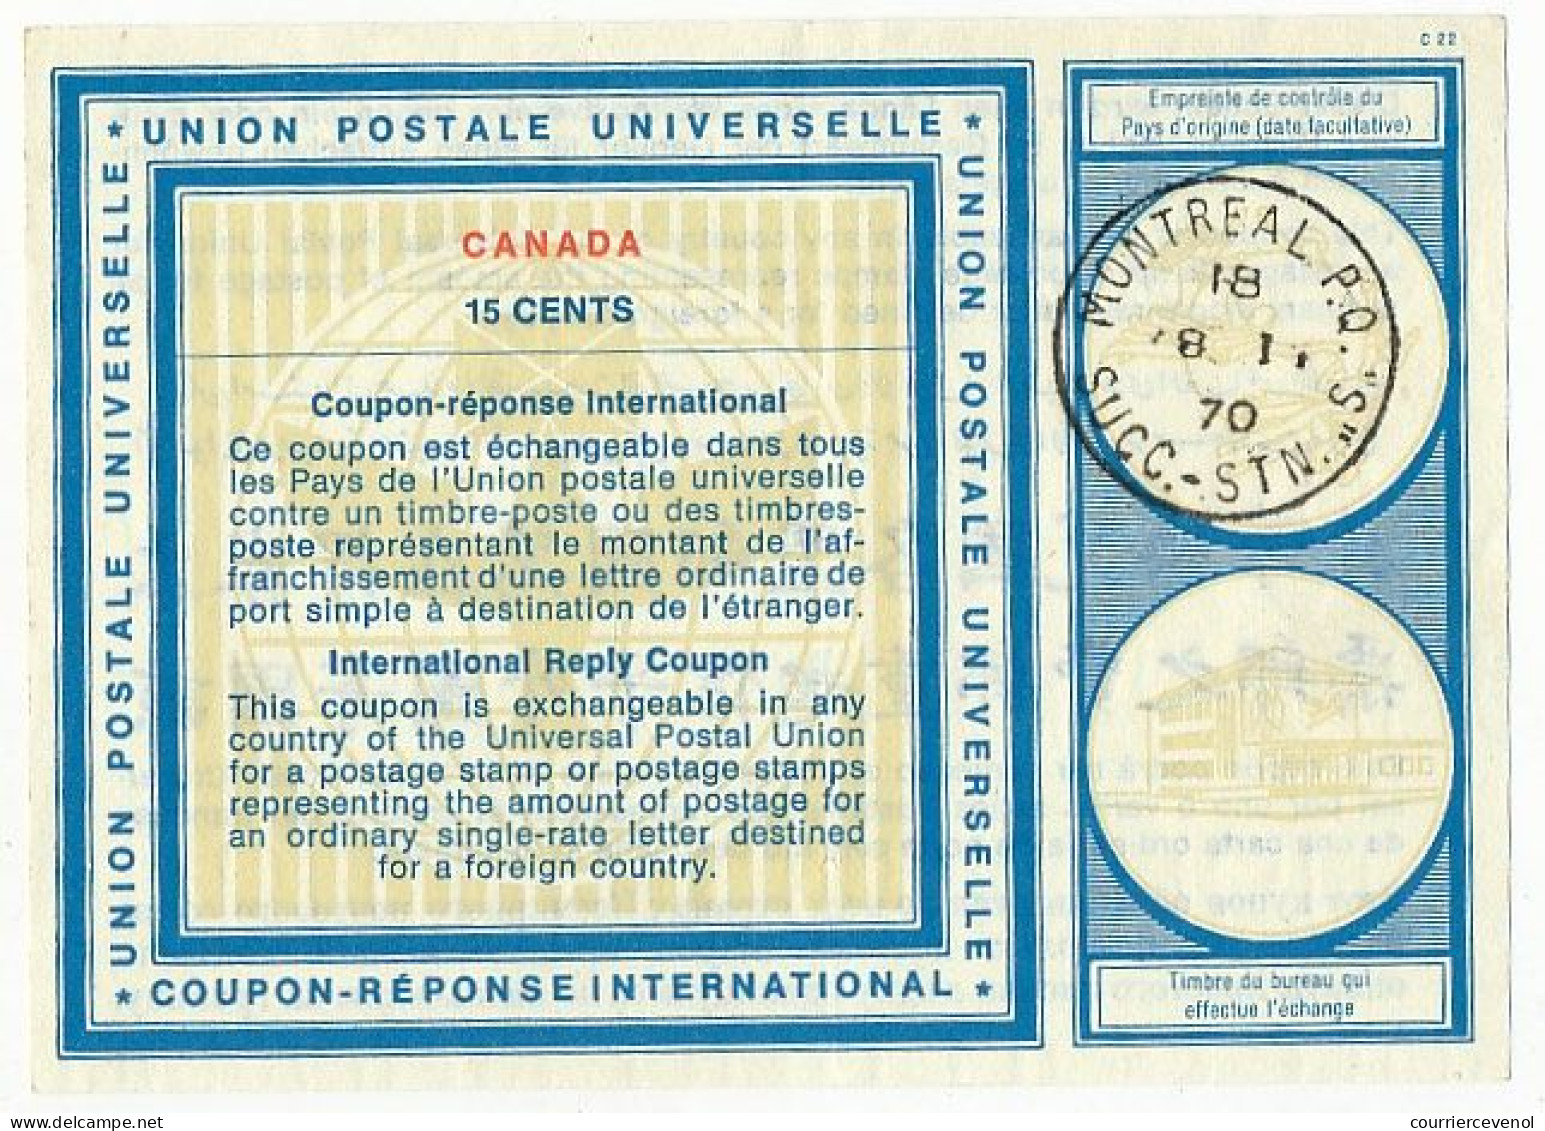 CANADA - COUPON REPONSE INTERNATIONAL. INTERNATIONAL REPLY COUPON. 15 CENTS. MONTREAL P.Q. - Reply Coupons